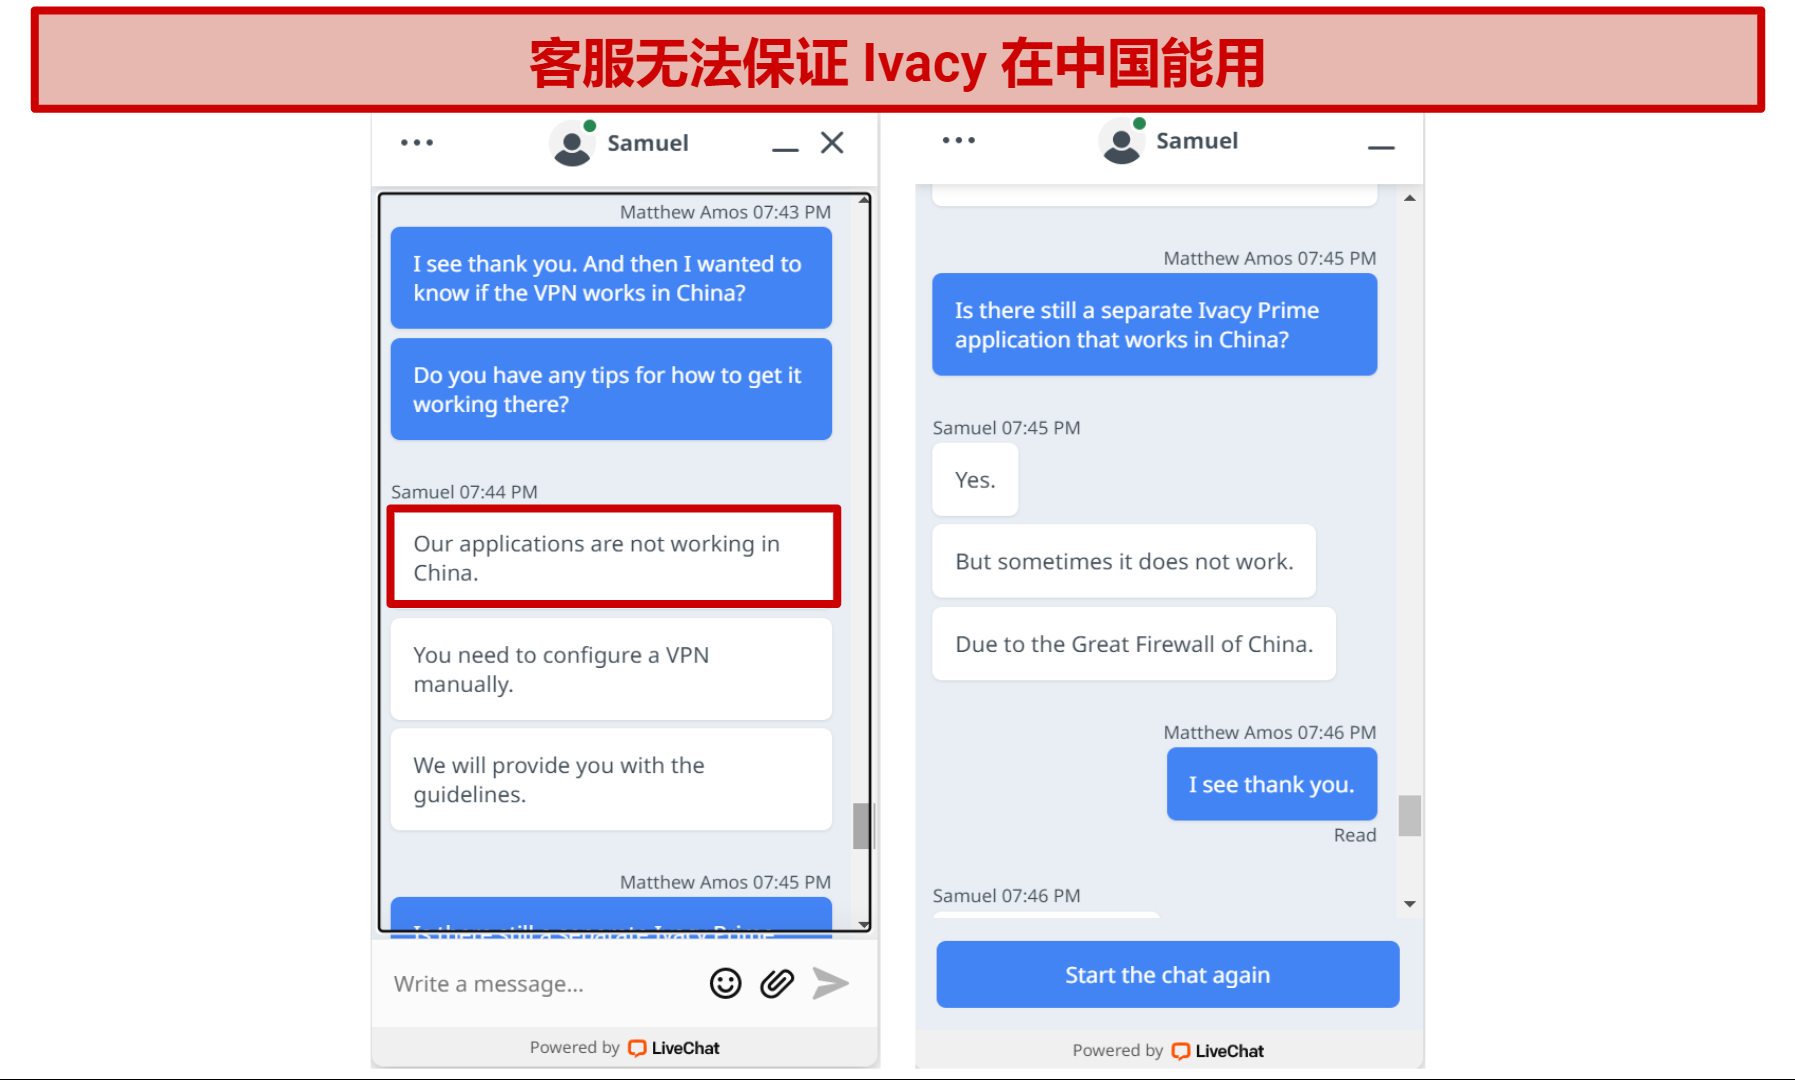 Screenshot of Ivacy VPN support staff telling me it doesn't always work in China